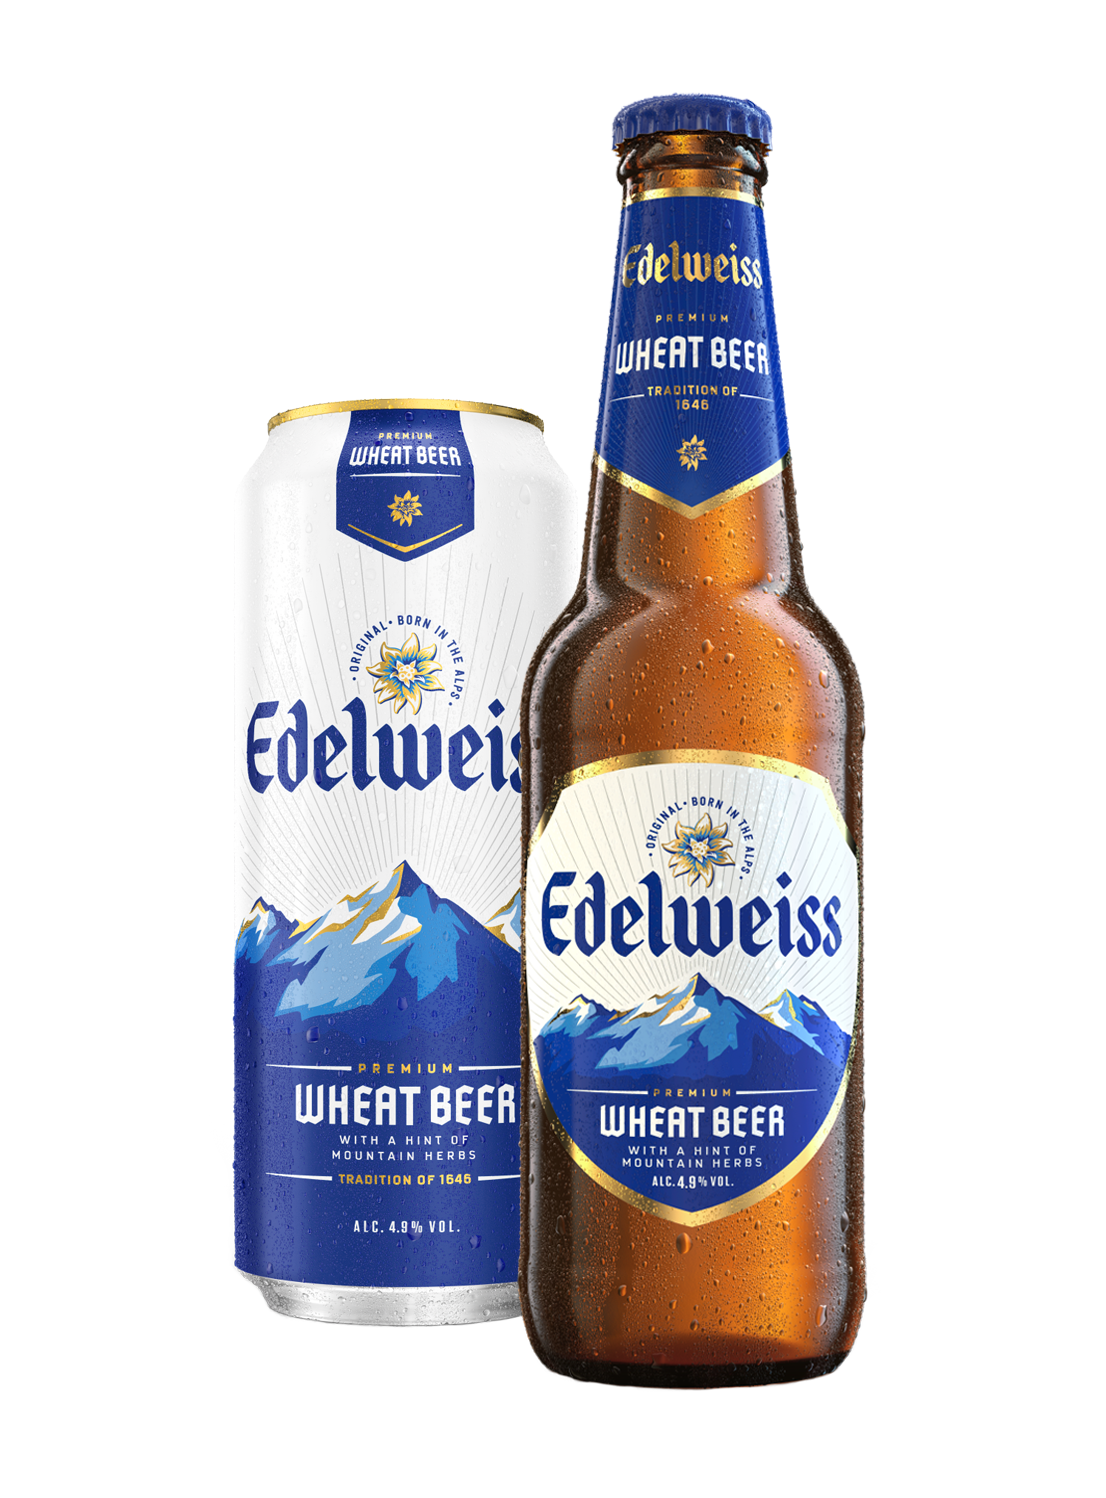 Edelweiss Wheat Beer Bottle And Glass 1106X1496px (1)